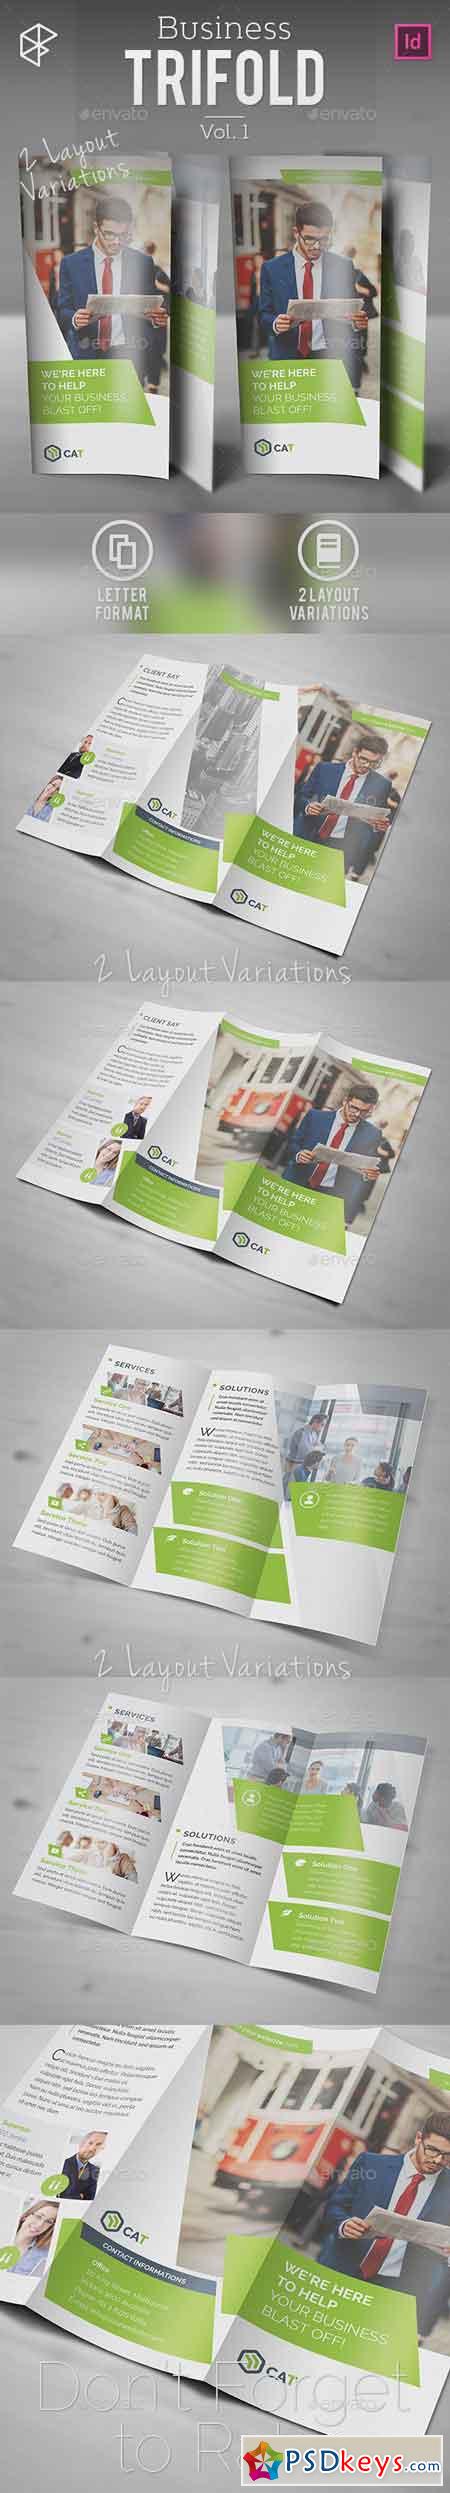 Business Trifold Vol. 1 14403516